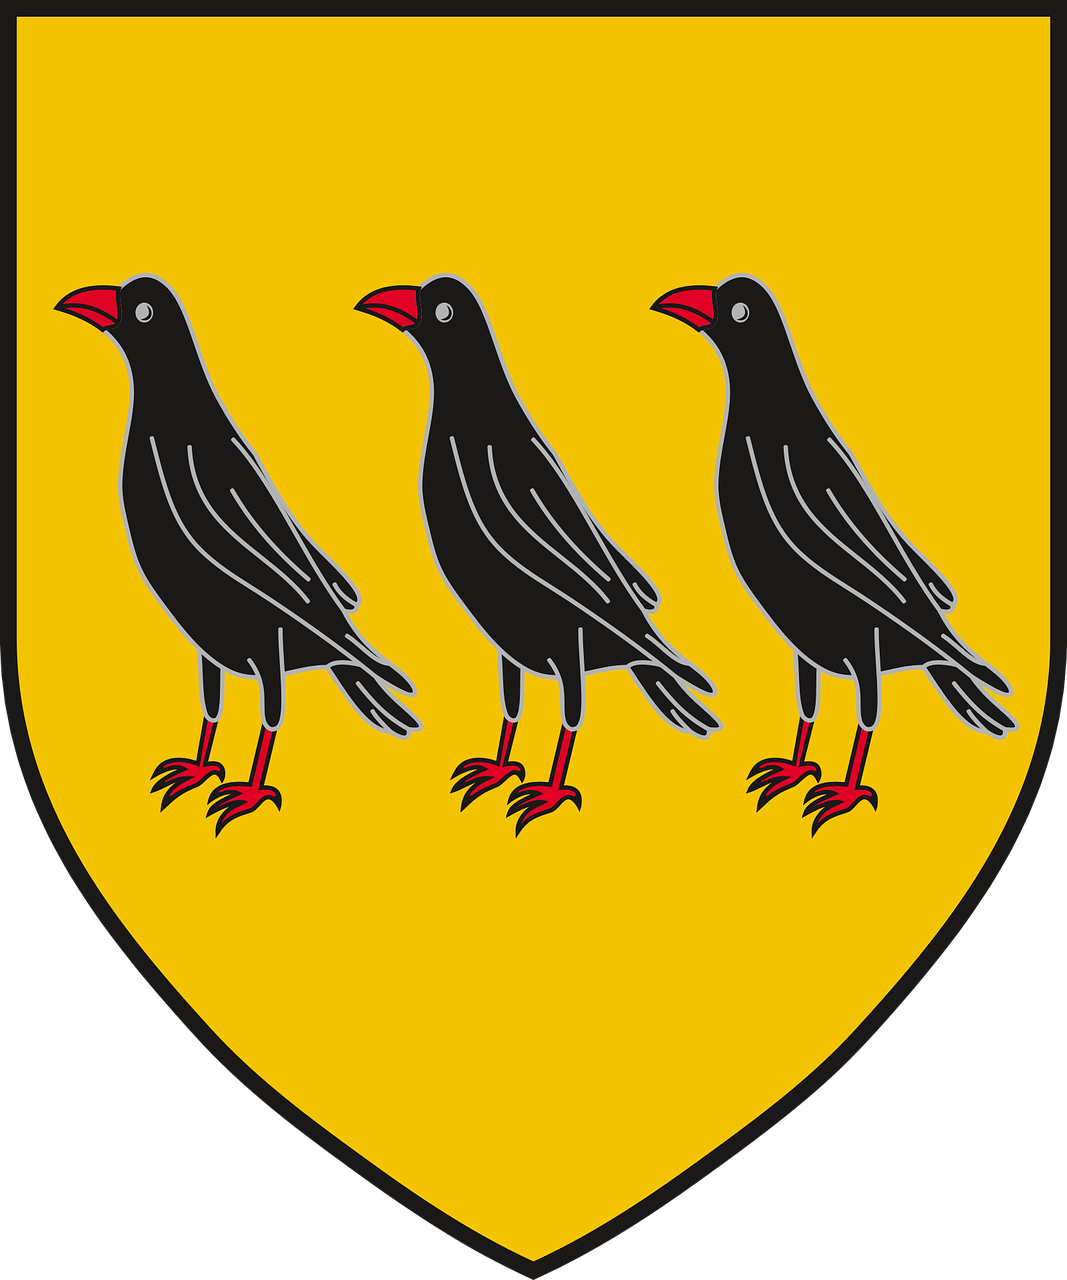 coat of arms borch three jackdaws no background free photo